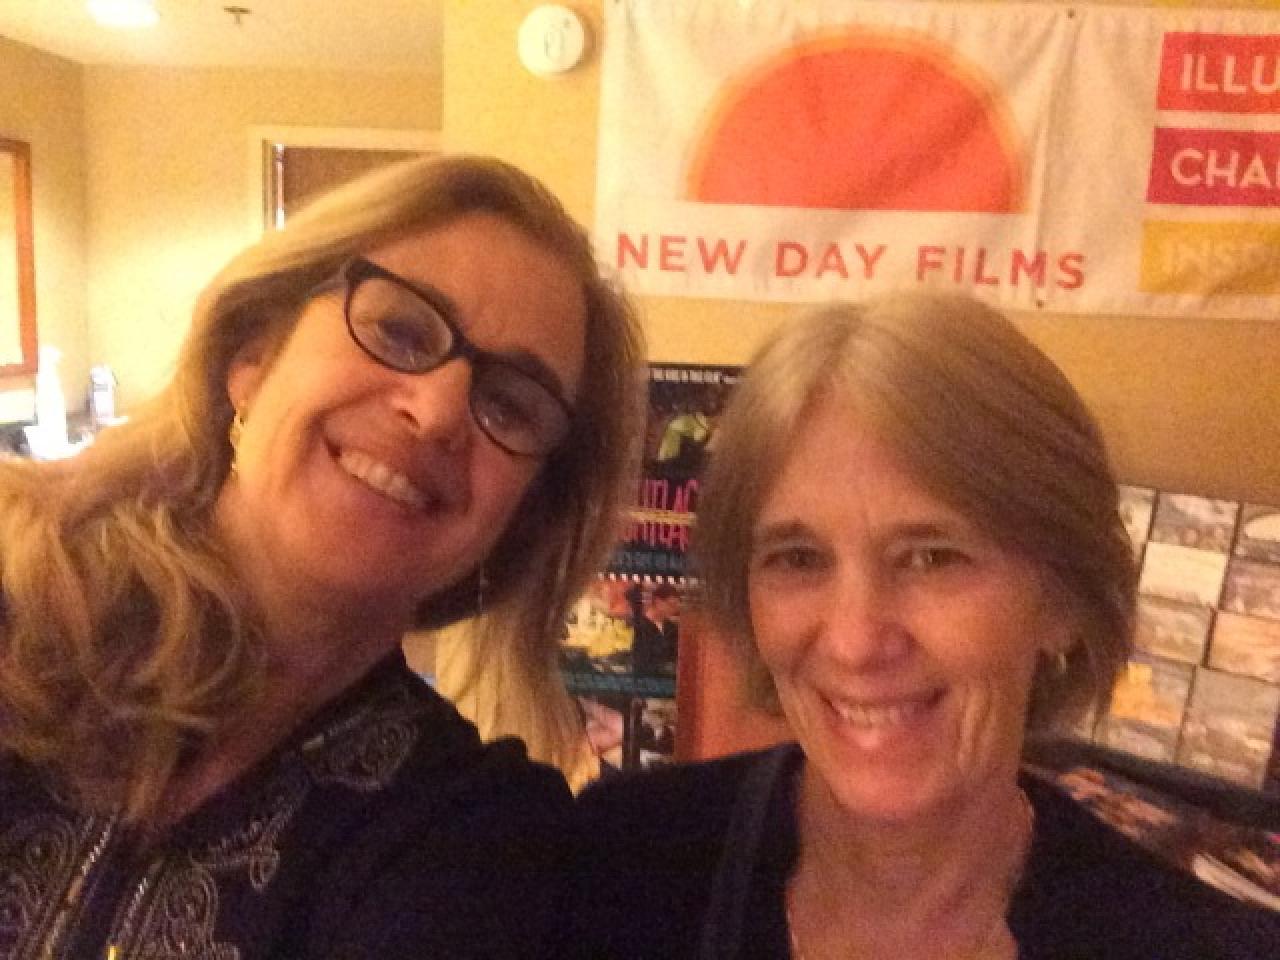 Filmmakers in front of the New Day Films exhibition table smiling for the camera.